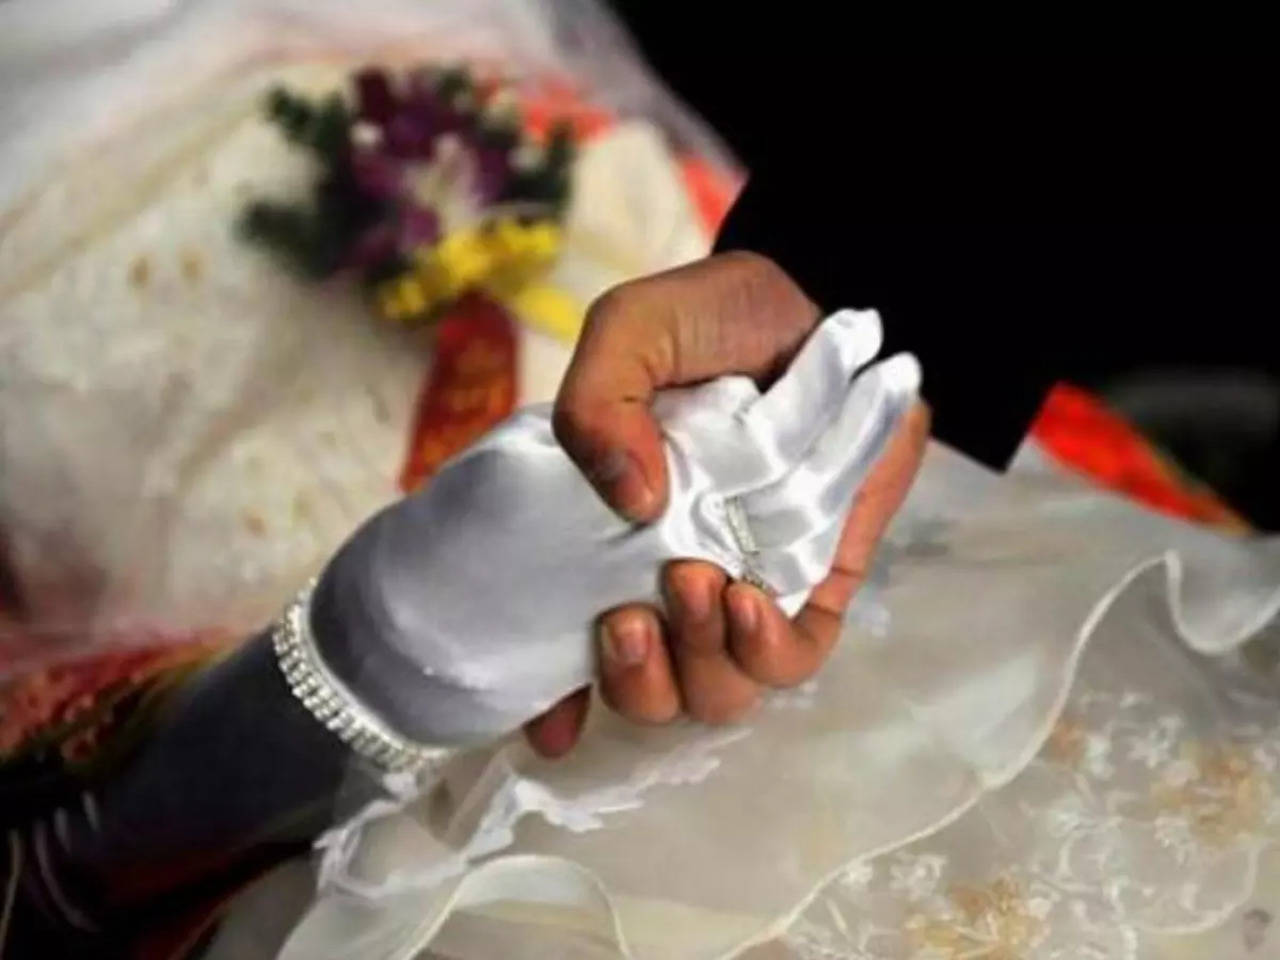 Chinas ghost weddings, a practice that may send a chill down your spine All you need to know pic